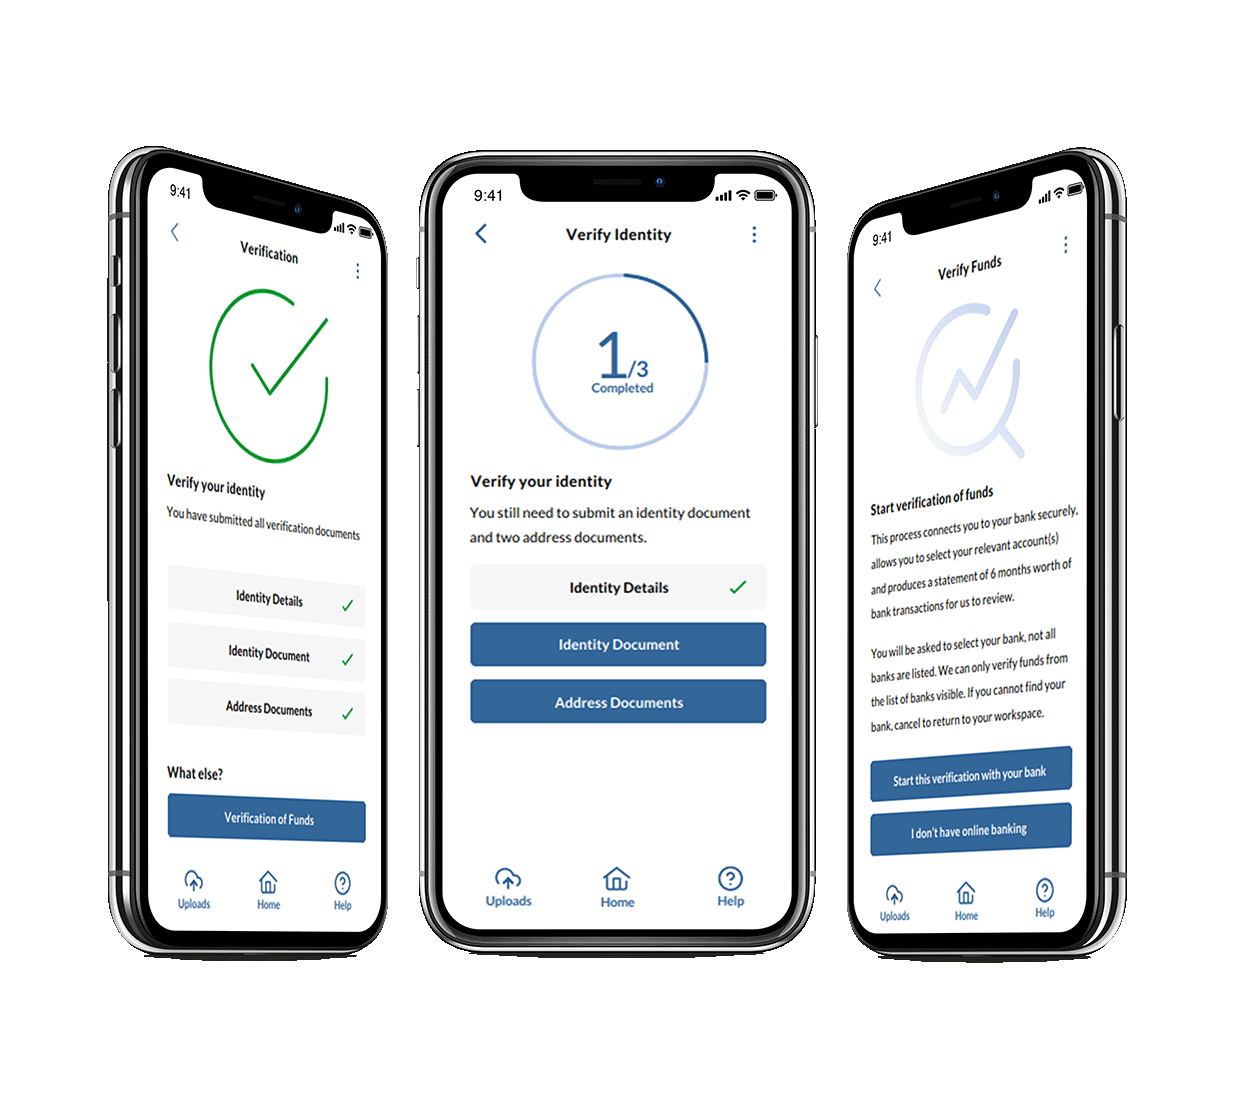 Verification of Identity and Funds on the eCOS app